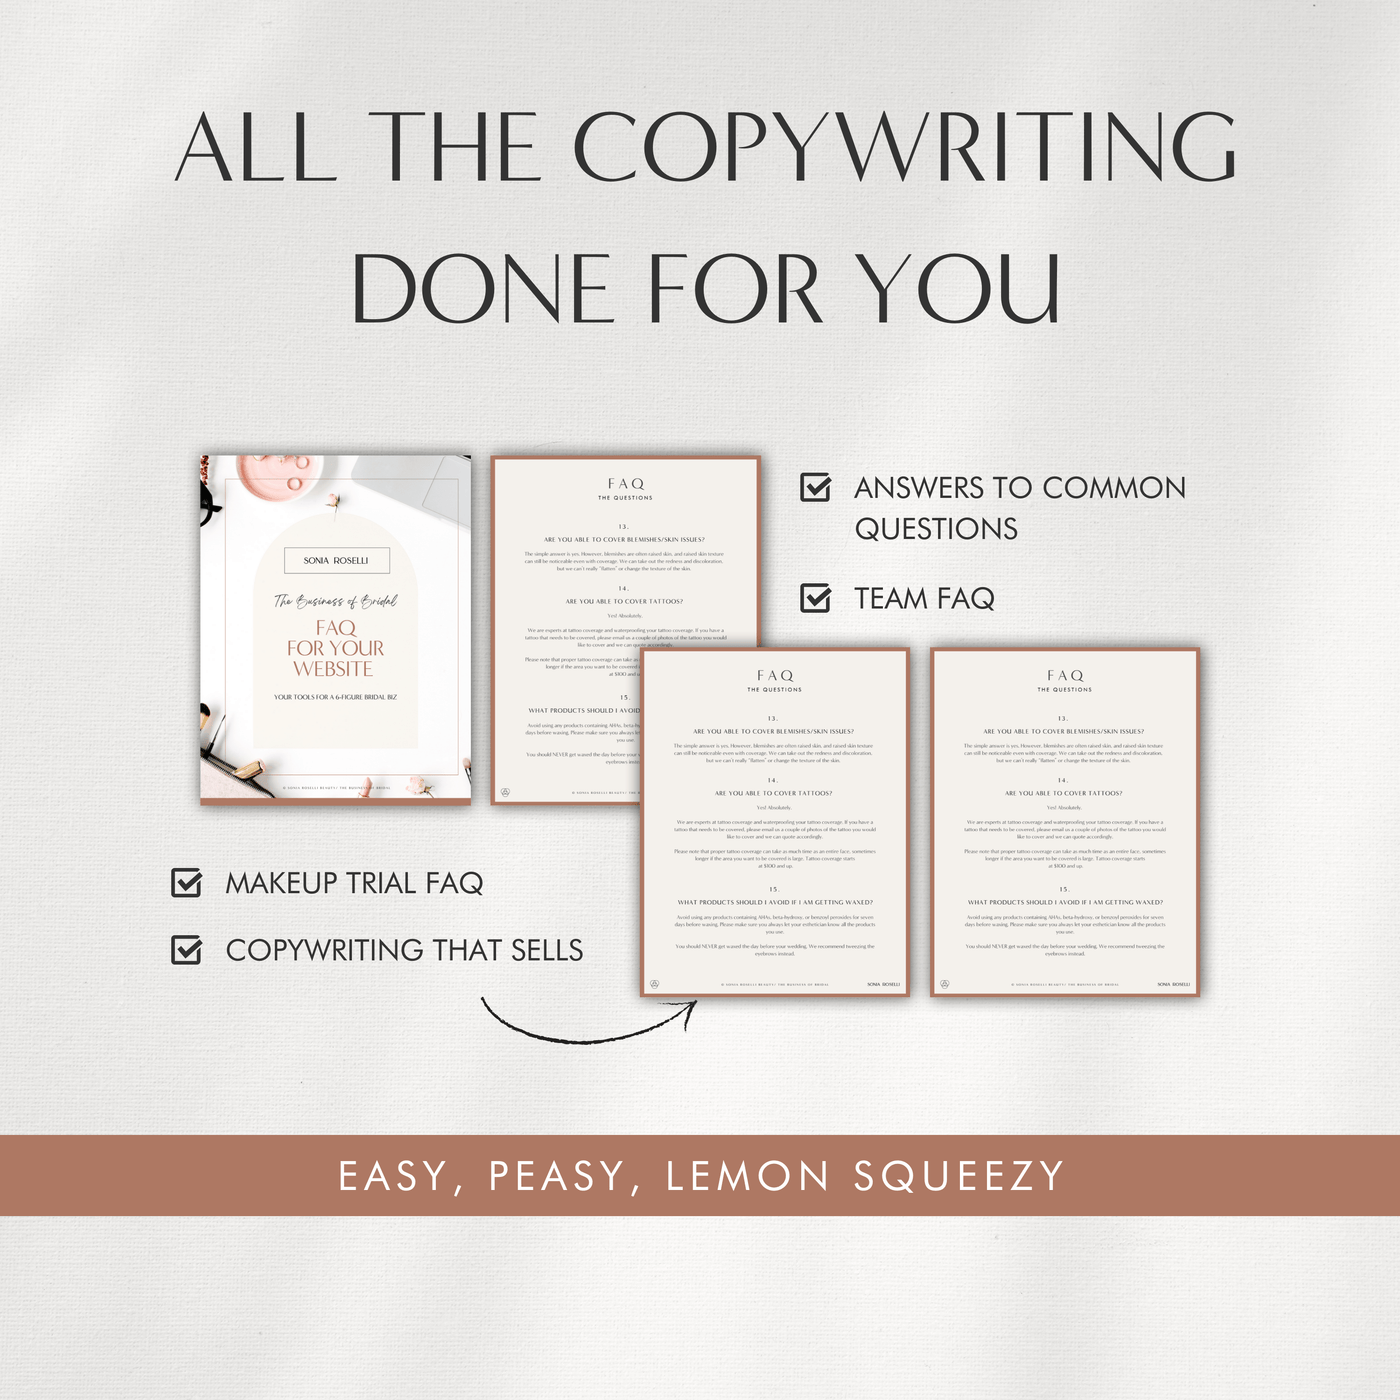 All the copywriting done for you